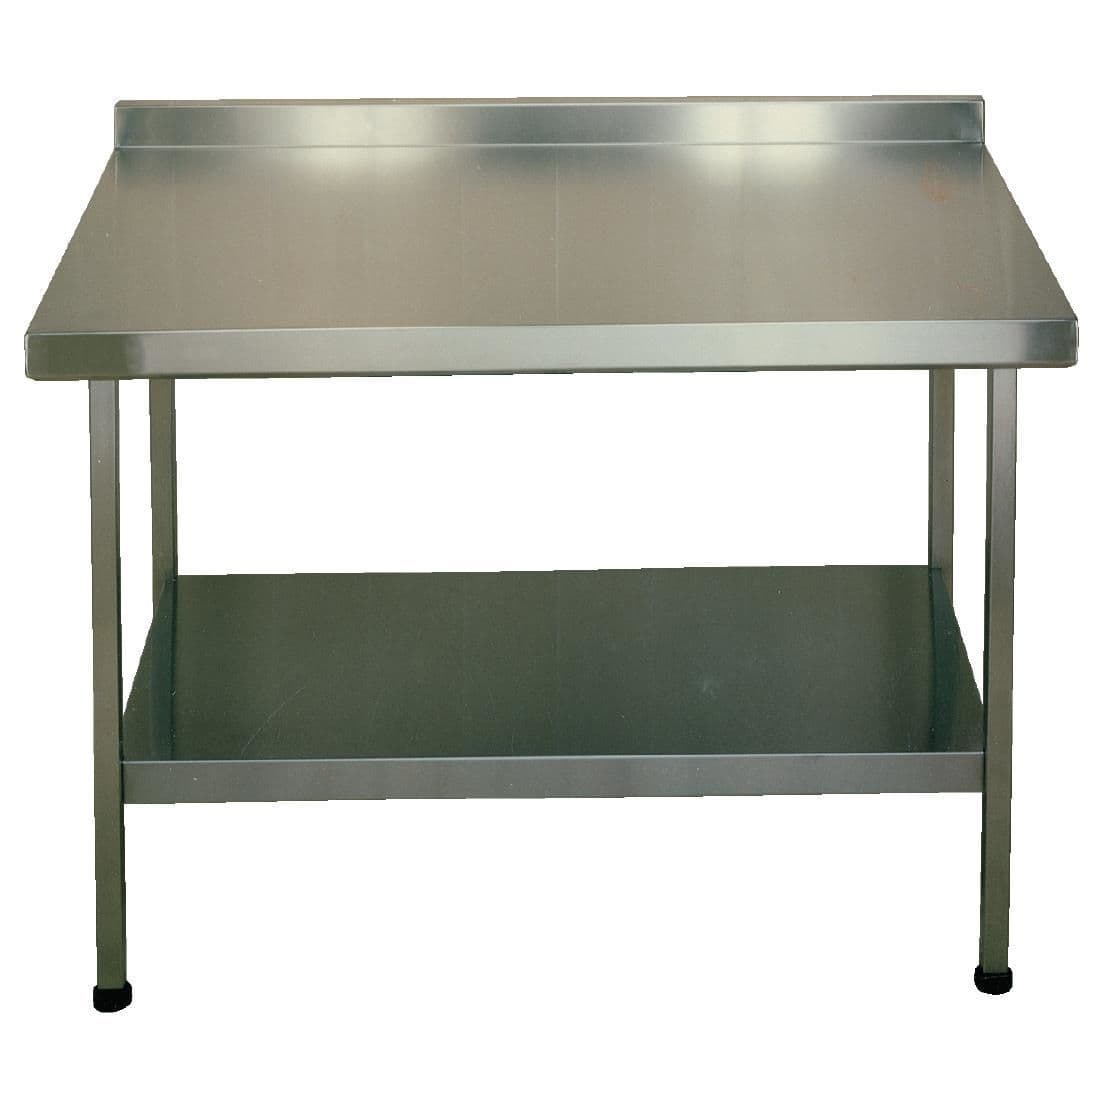 Franke Sissons Stainless Steel Wall Table with Upstand 1500x600mm JD Catering Equipment Solutions Ltd